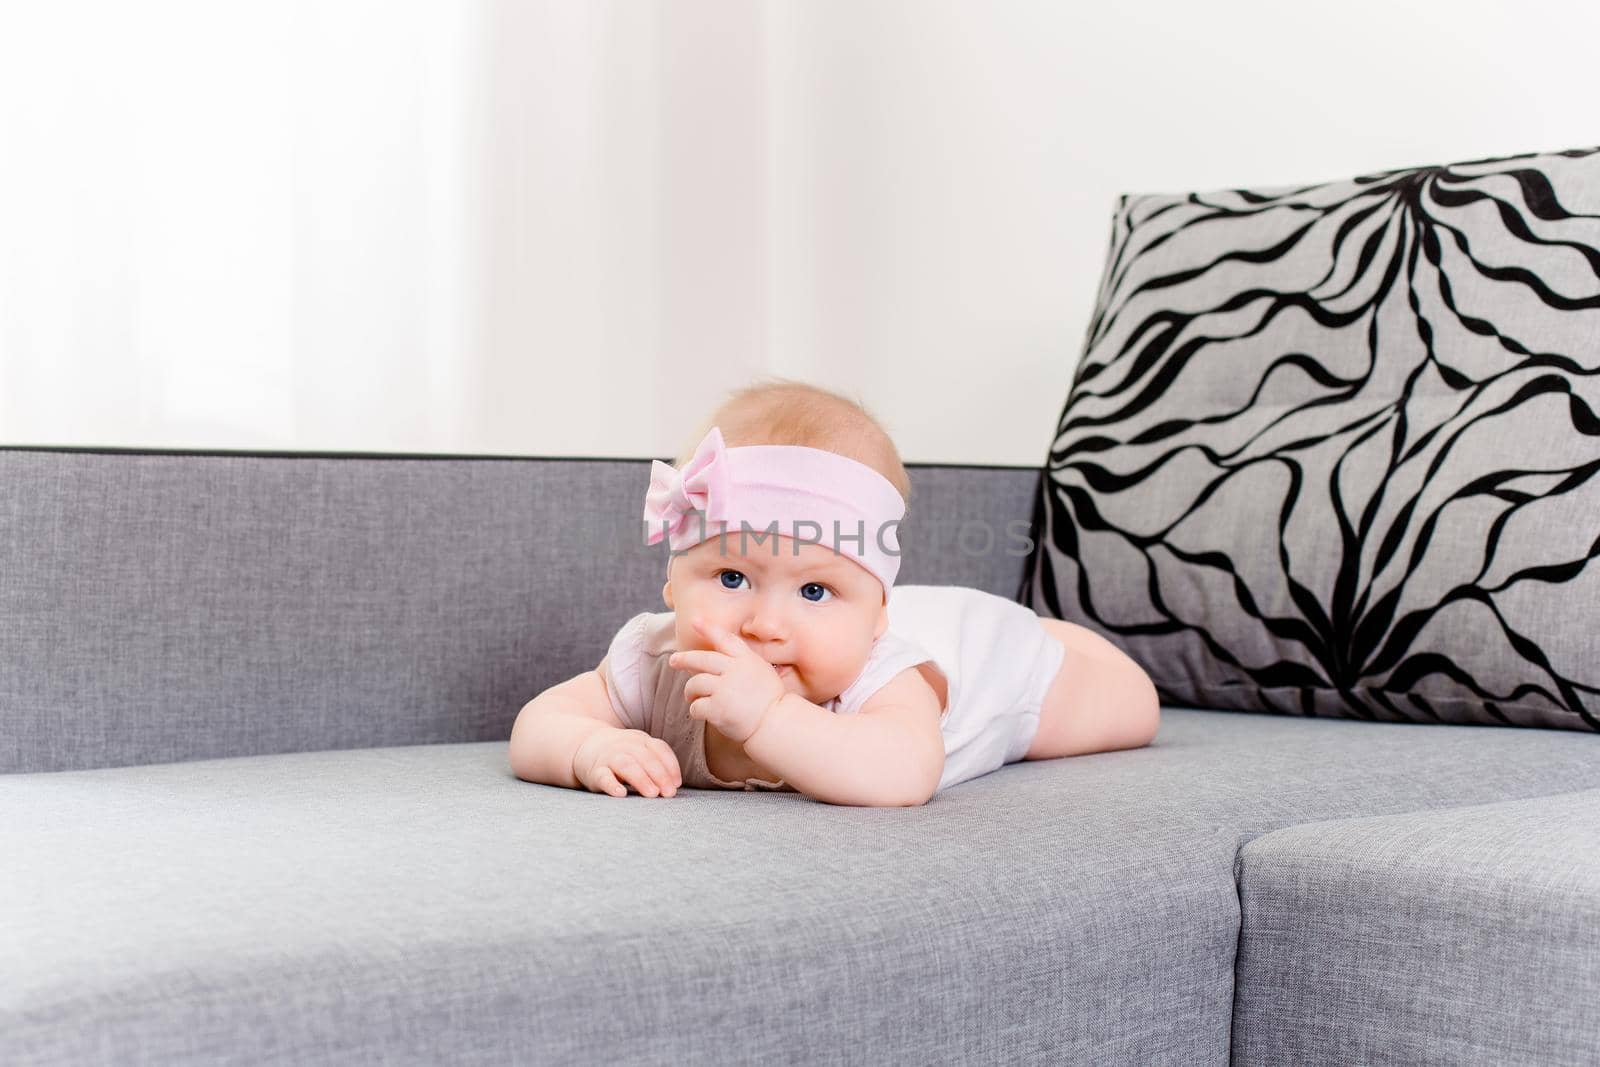 Portrait of a baby girl with a bandage and a bow on her head on a sofa. Beautiful child with blue eyes